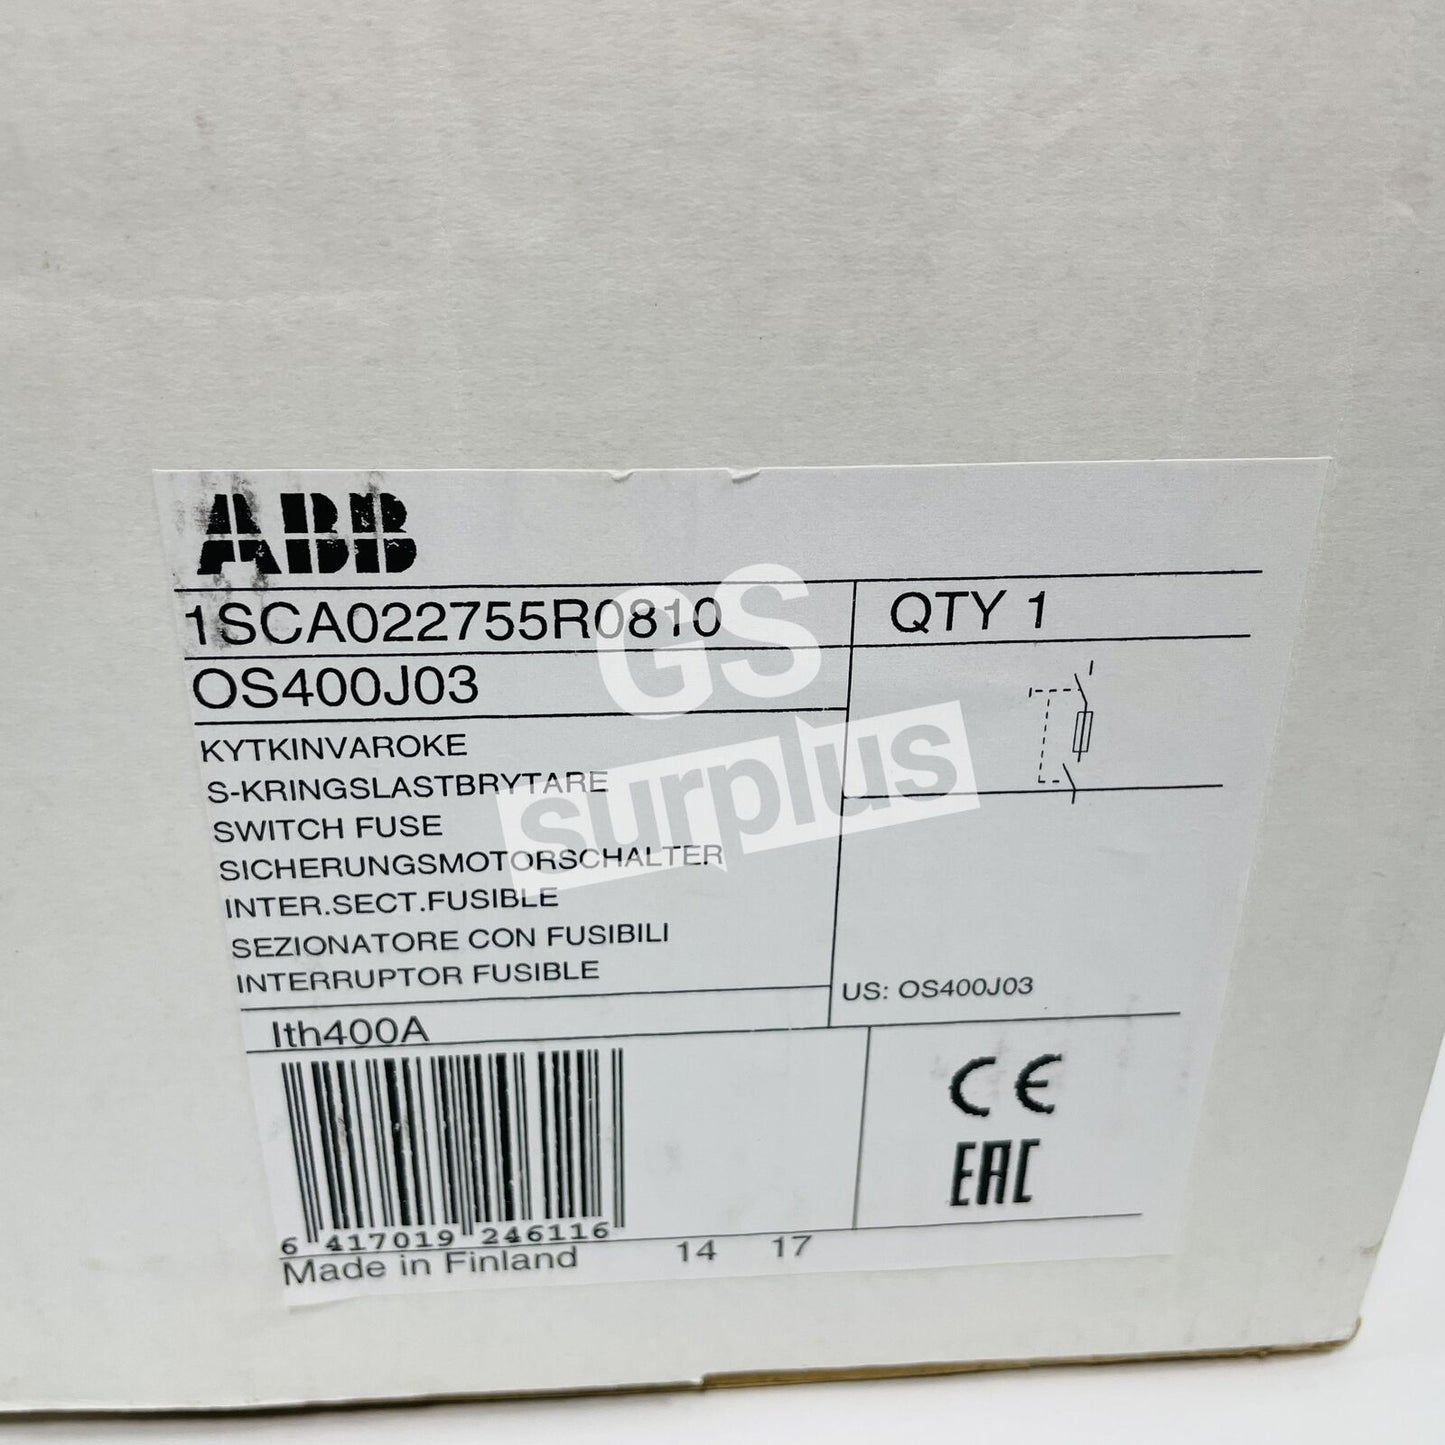 ABB 1SCA022755R0810 / OS400J03 Fusible Disconnect Switch